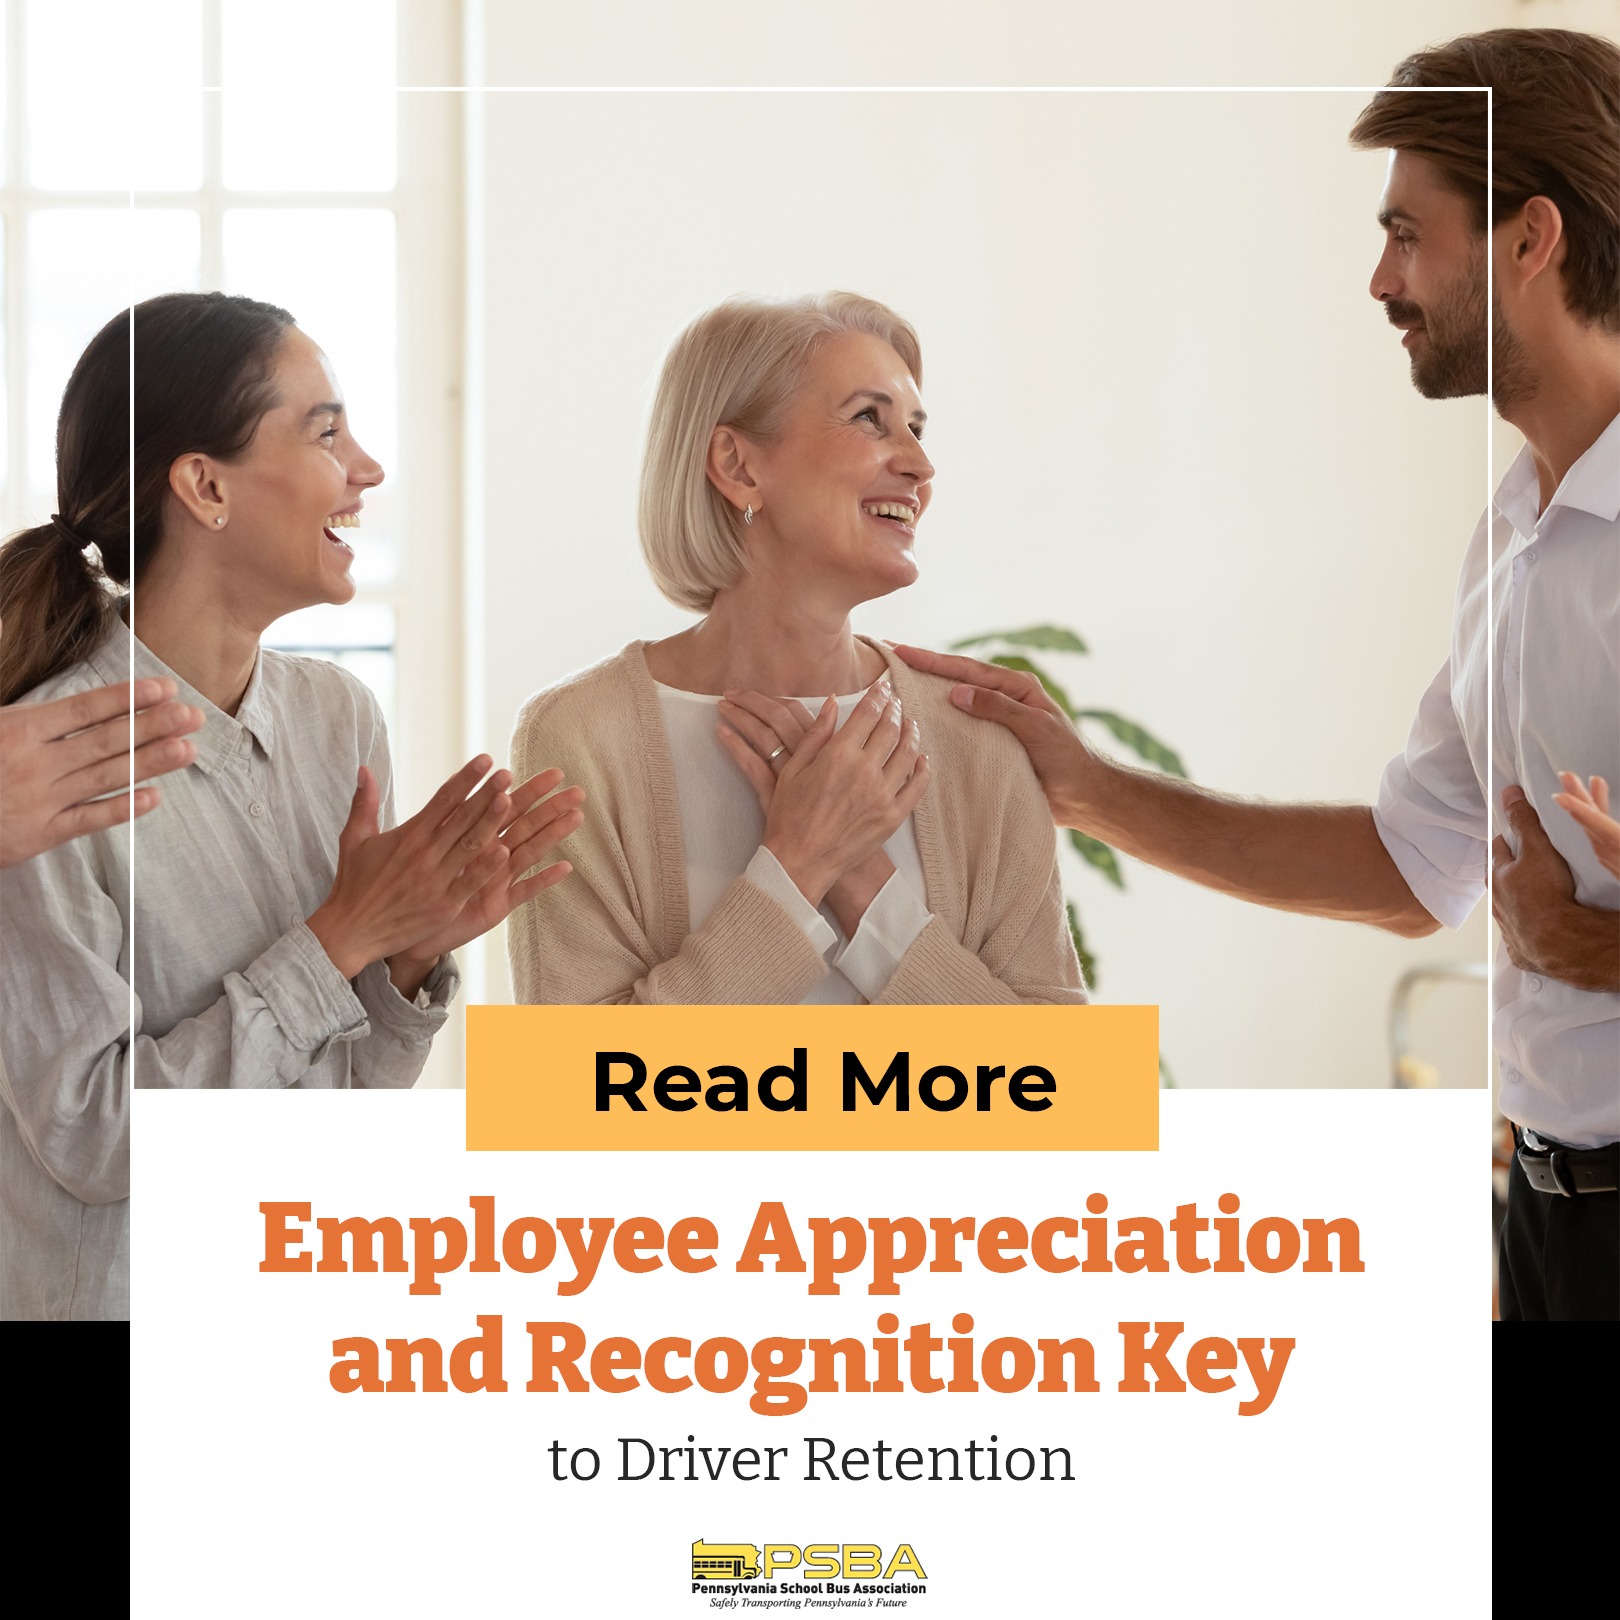 Employee Appreciation and Recognition Key to Driver Retention